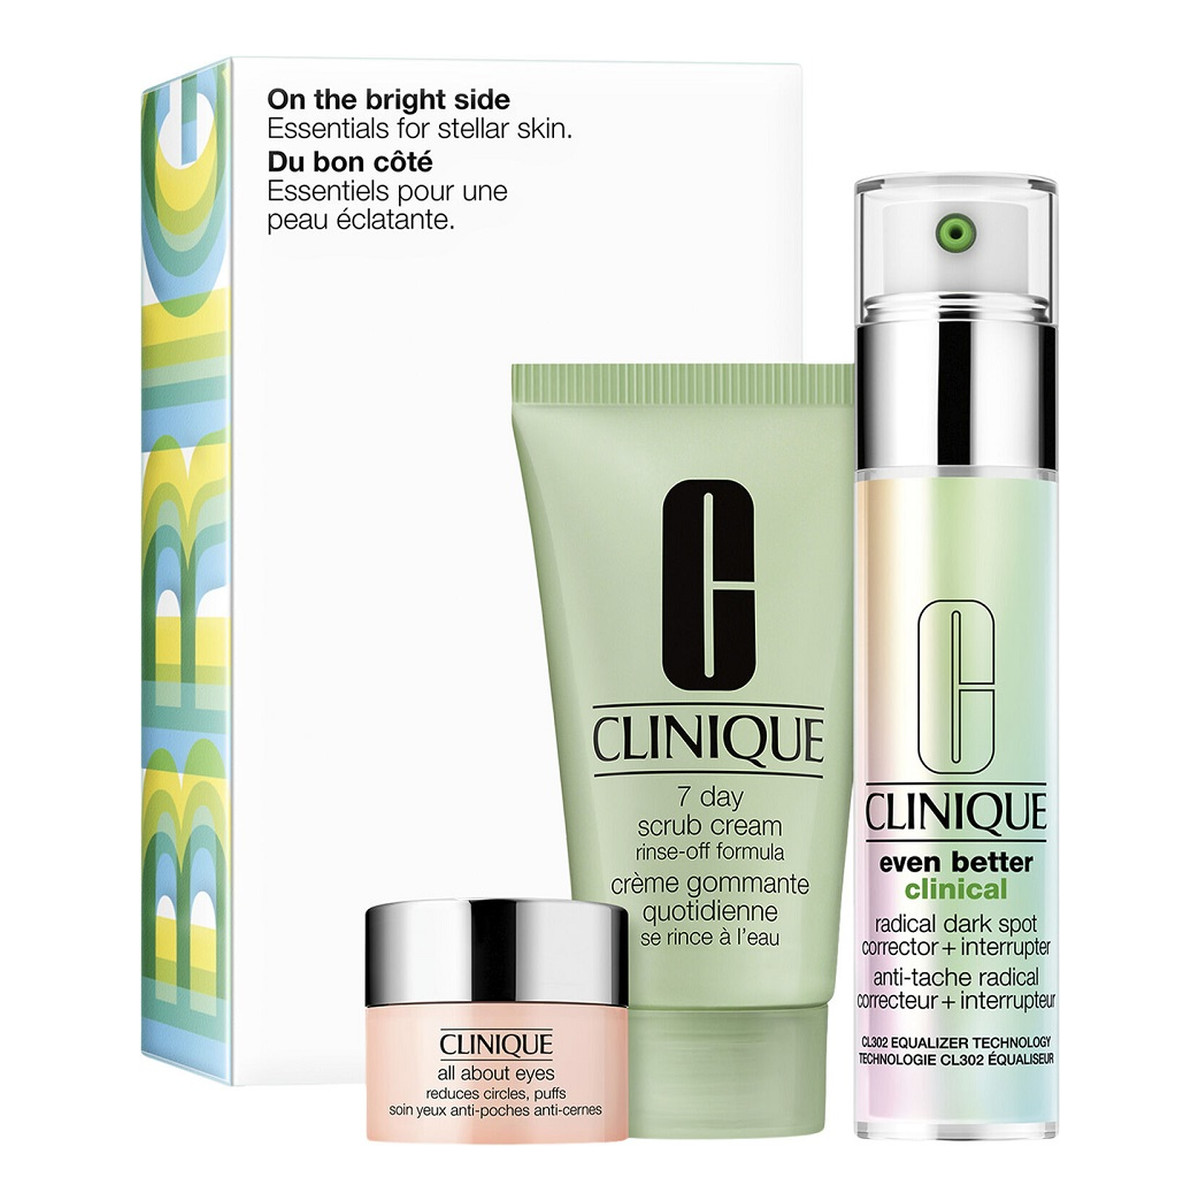 Clinique On The Bright Side Zestaw all about eyes 5ml + 7 day scrub cream rinse-off formula 30ml + even better clinical radical dark spot corrector interrupter 30ml